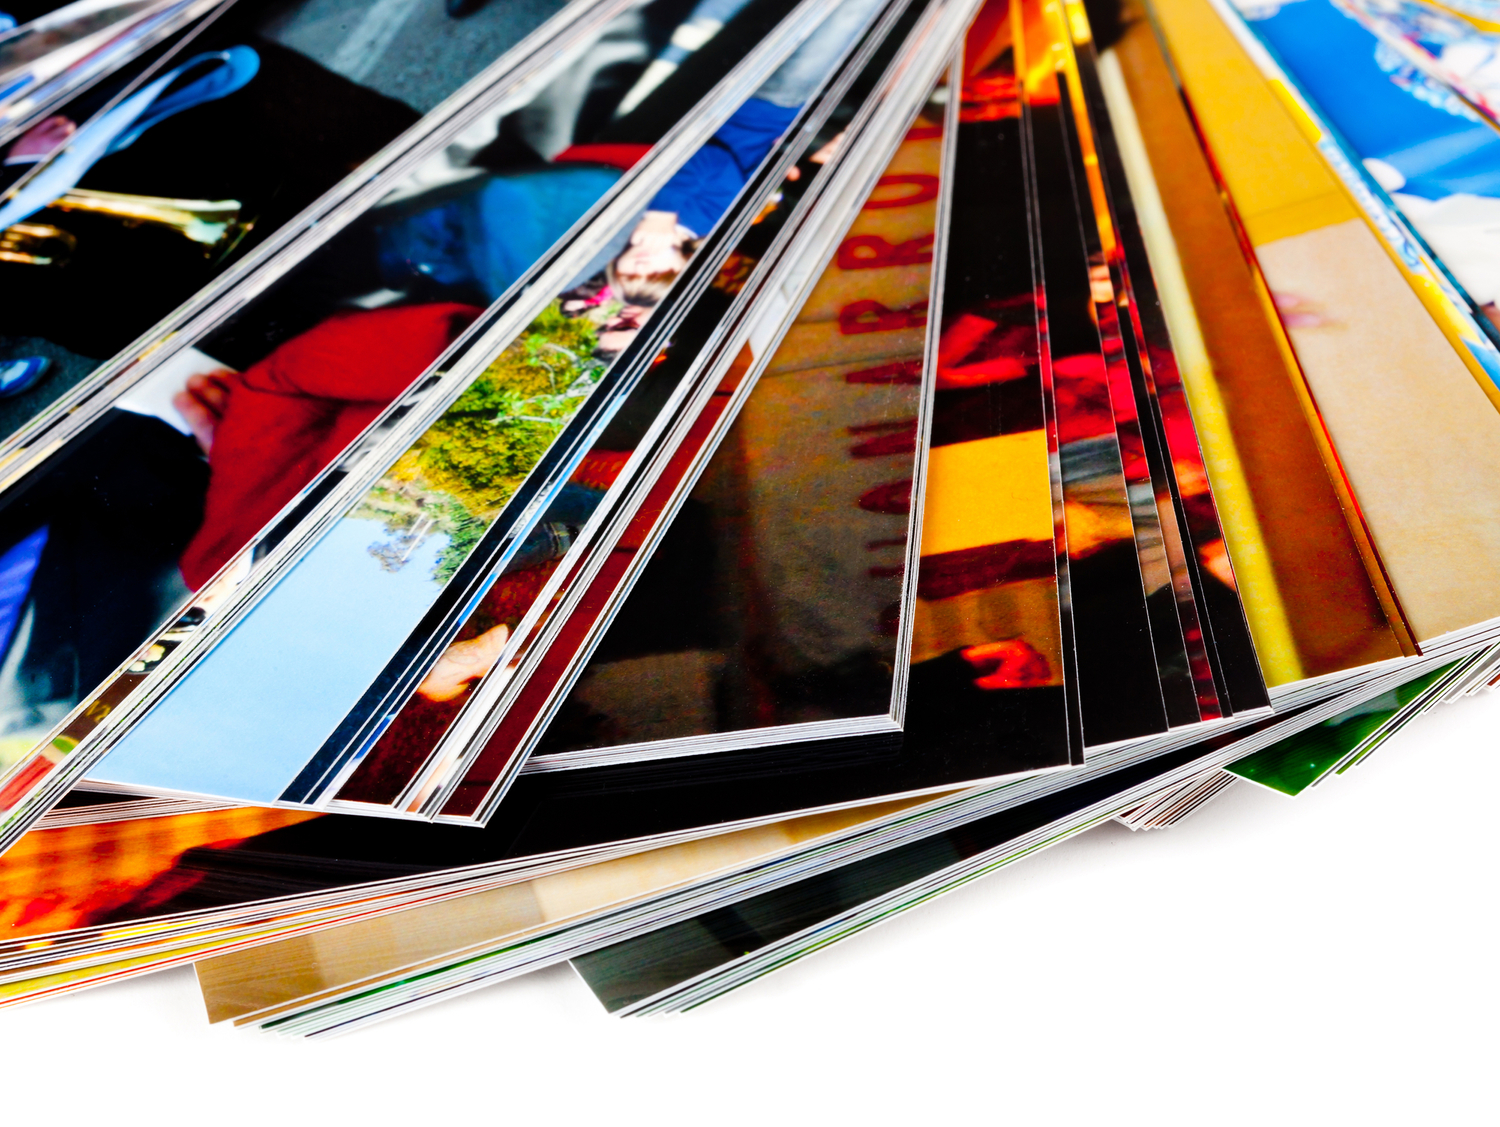 Organize your catastrophic digital photo library